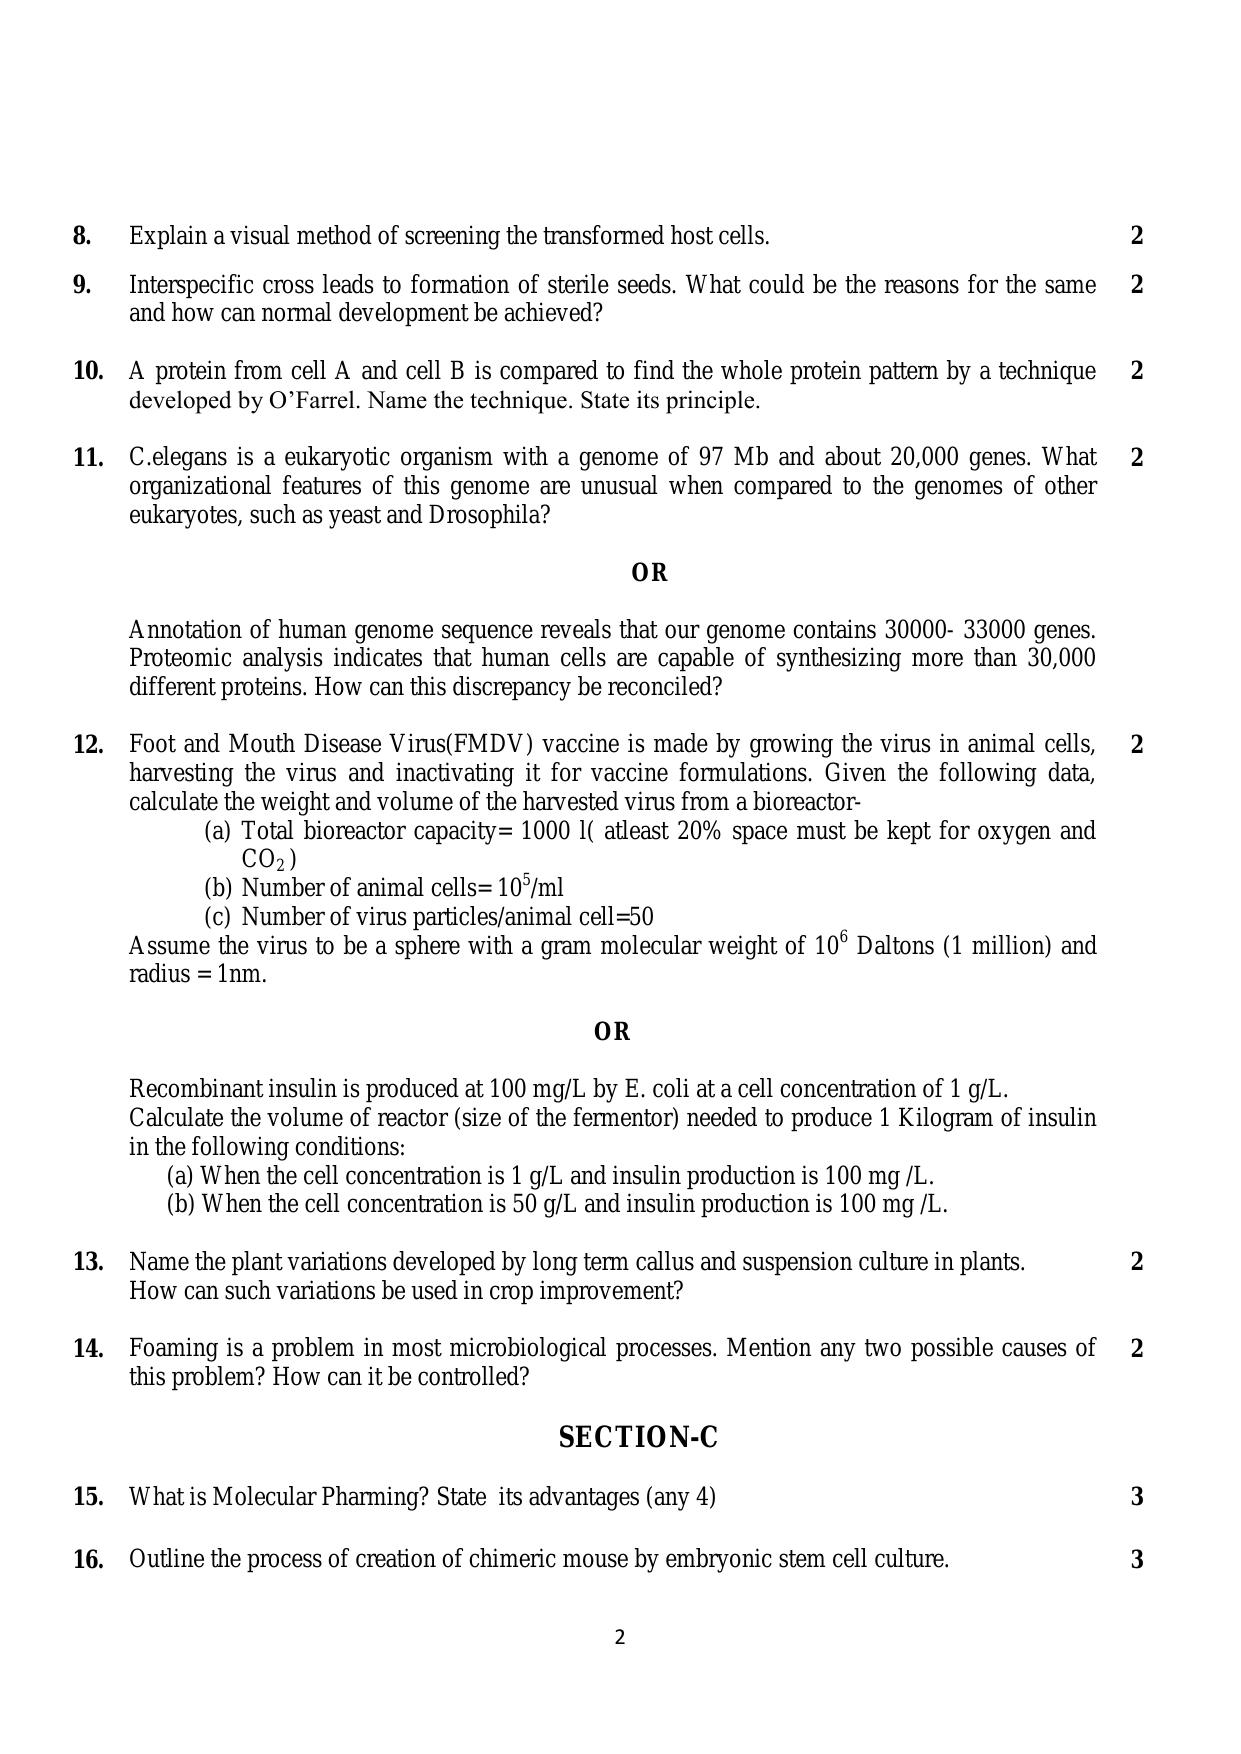 CBSE Class 12 Biotechnology-Sample Paper 2018-19 - Page 2